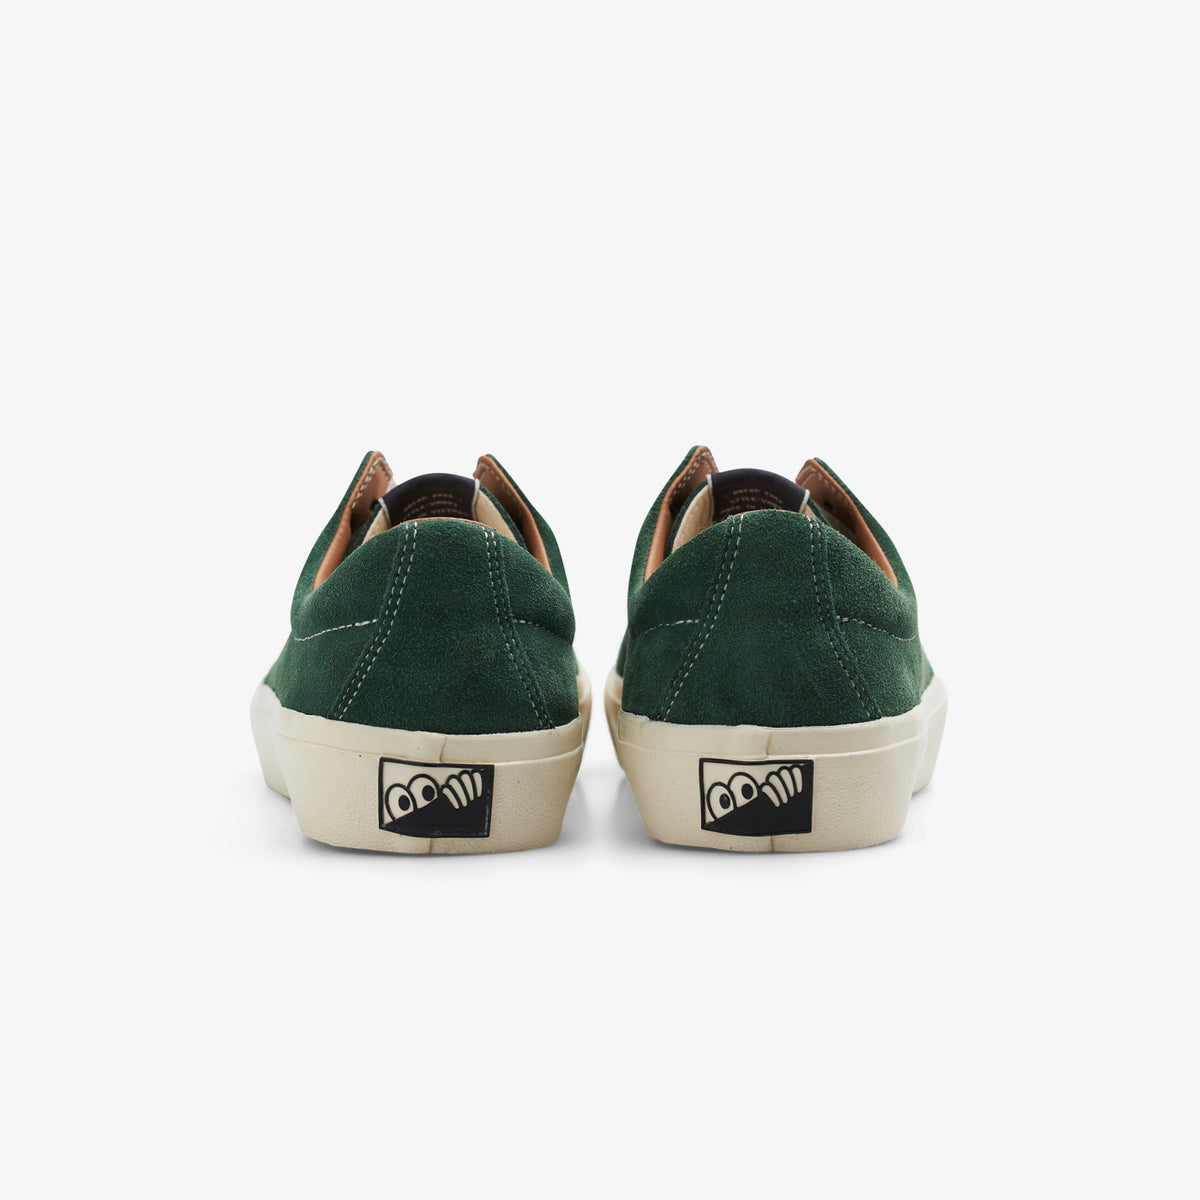 VM003 Low Suede (Green/White)